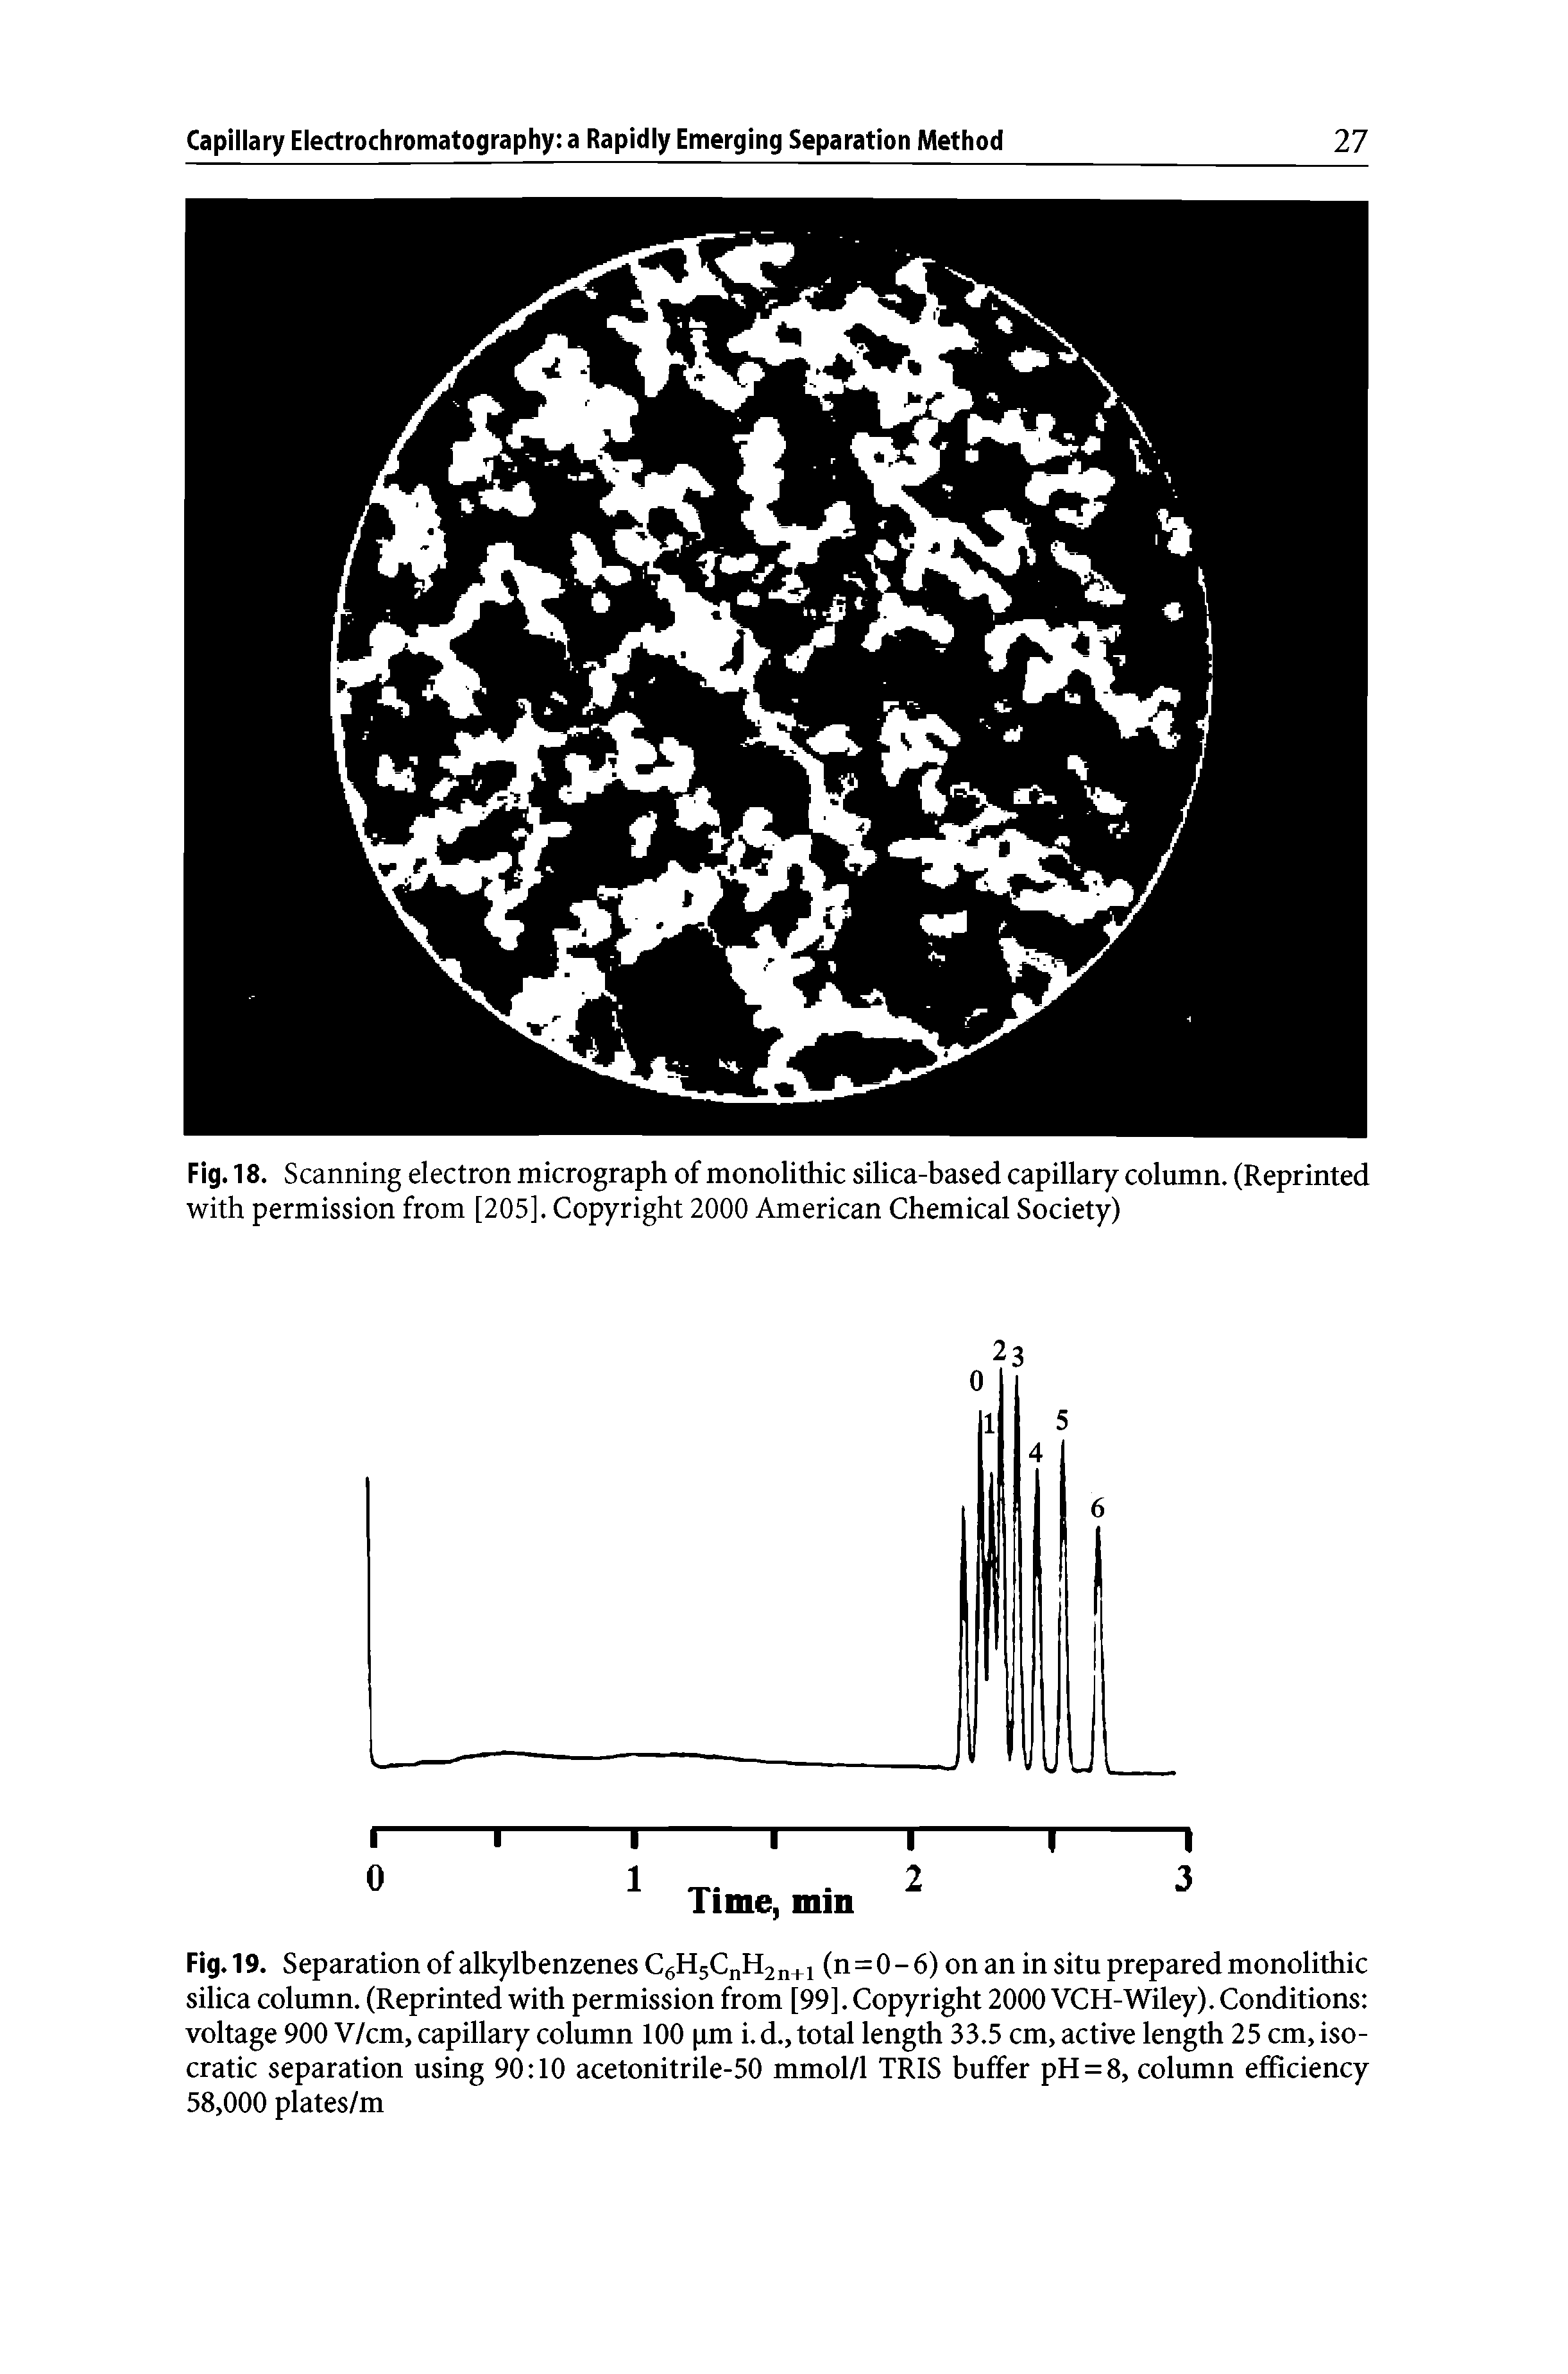 Fig. 19. Separation of alkylbenzenes C6H5CnH2n+1 (n=0-6) on an in situ prepared monolithic silica column. (Reprinted with permission from [99]. Copyright 2000 VCH-Wiley). Conditions voltage 900 V/cm, capillary column 100 pm i. d., total length 33.5 cm, active length 25 cm, iso-cratic separation using 90 10 acetonitrile-50 mmol/1 TRIS buffer pH = 8, column efficiency 58,000 plates/m...